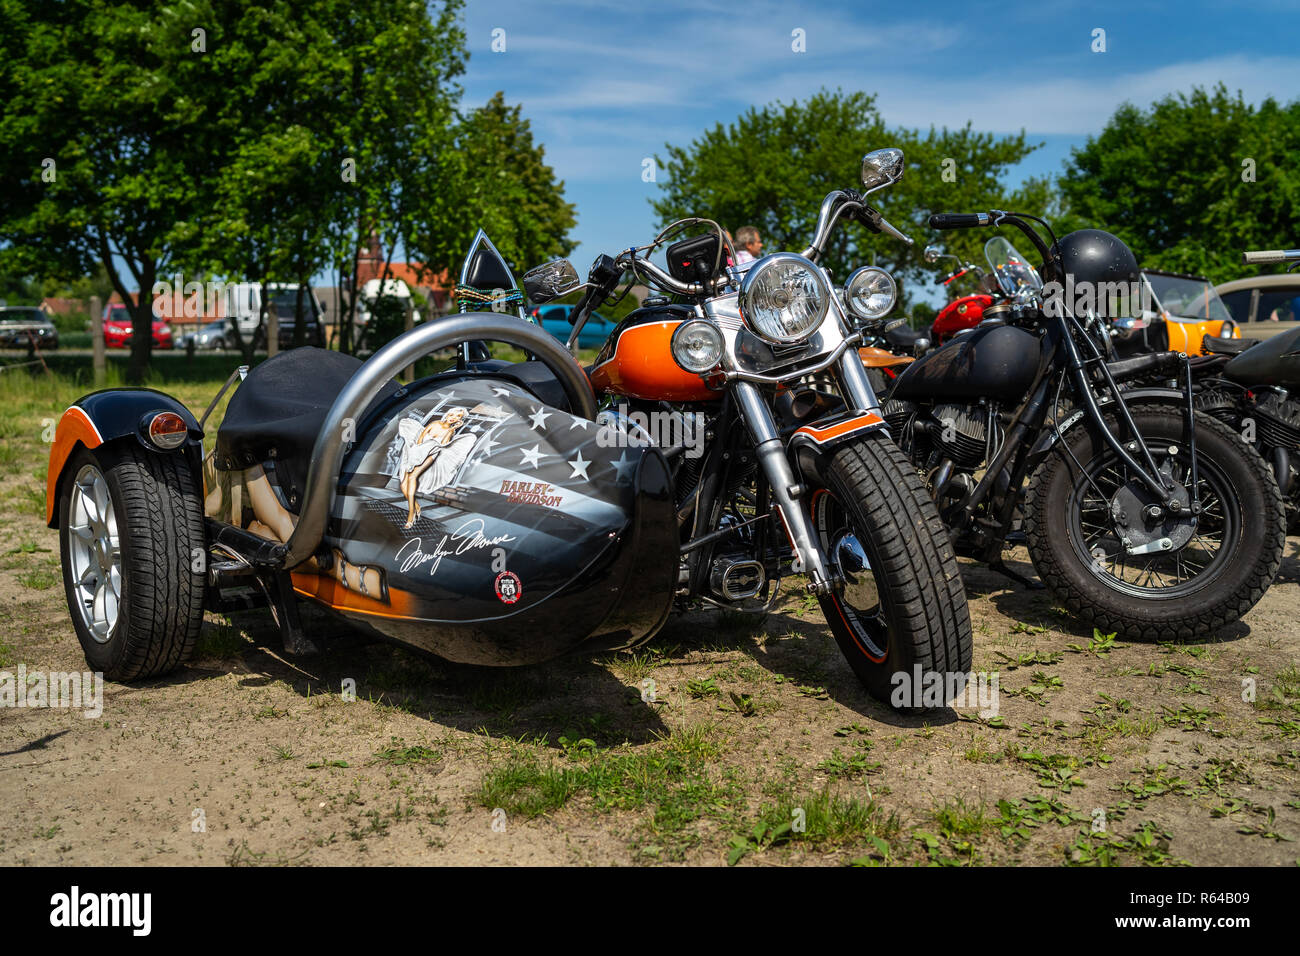 Motorcycle Harley-Davidson with sidecar. Stock Photo